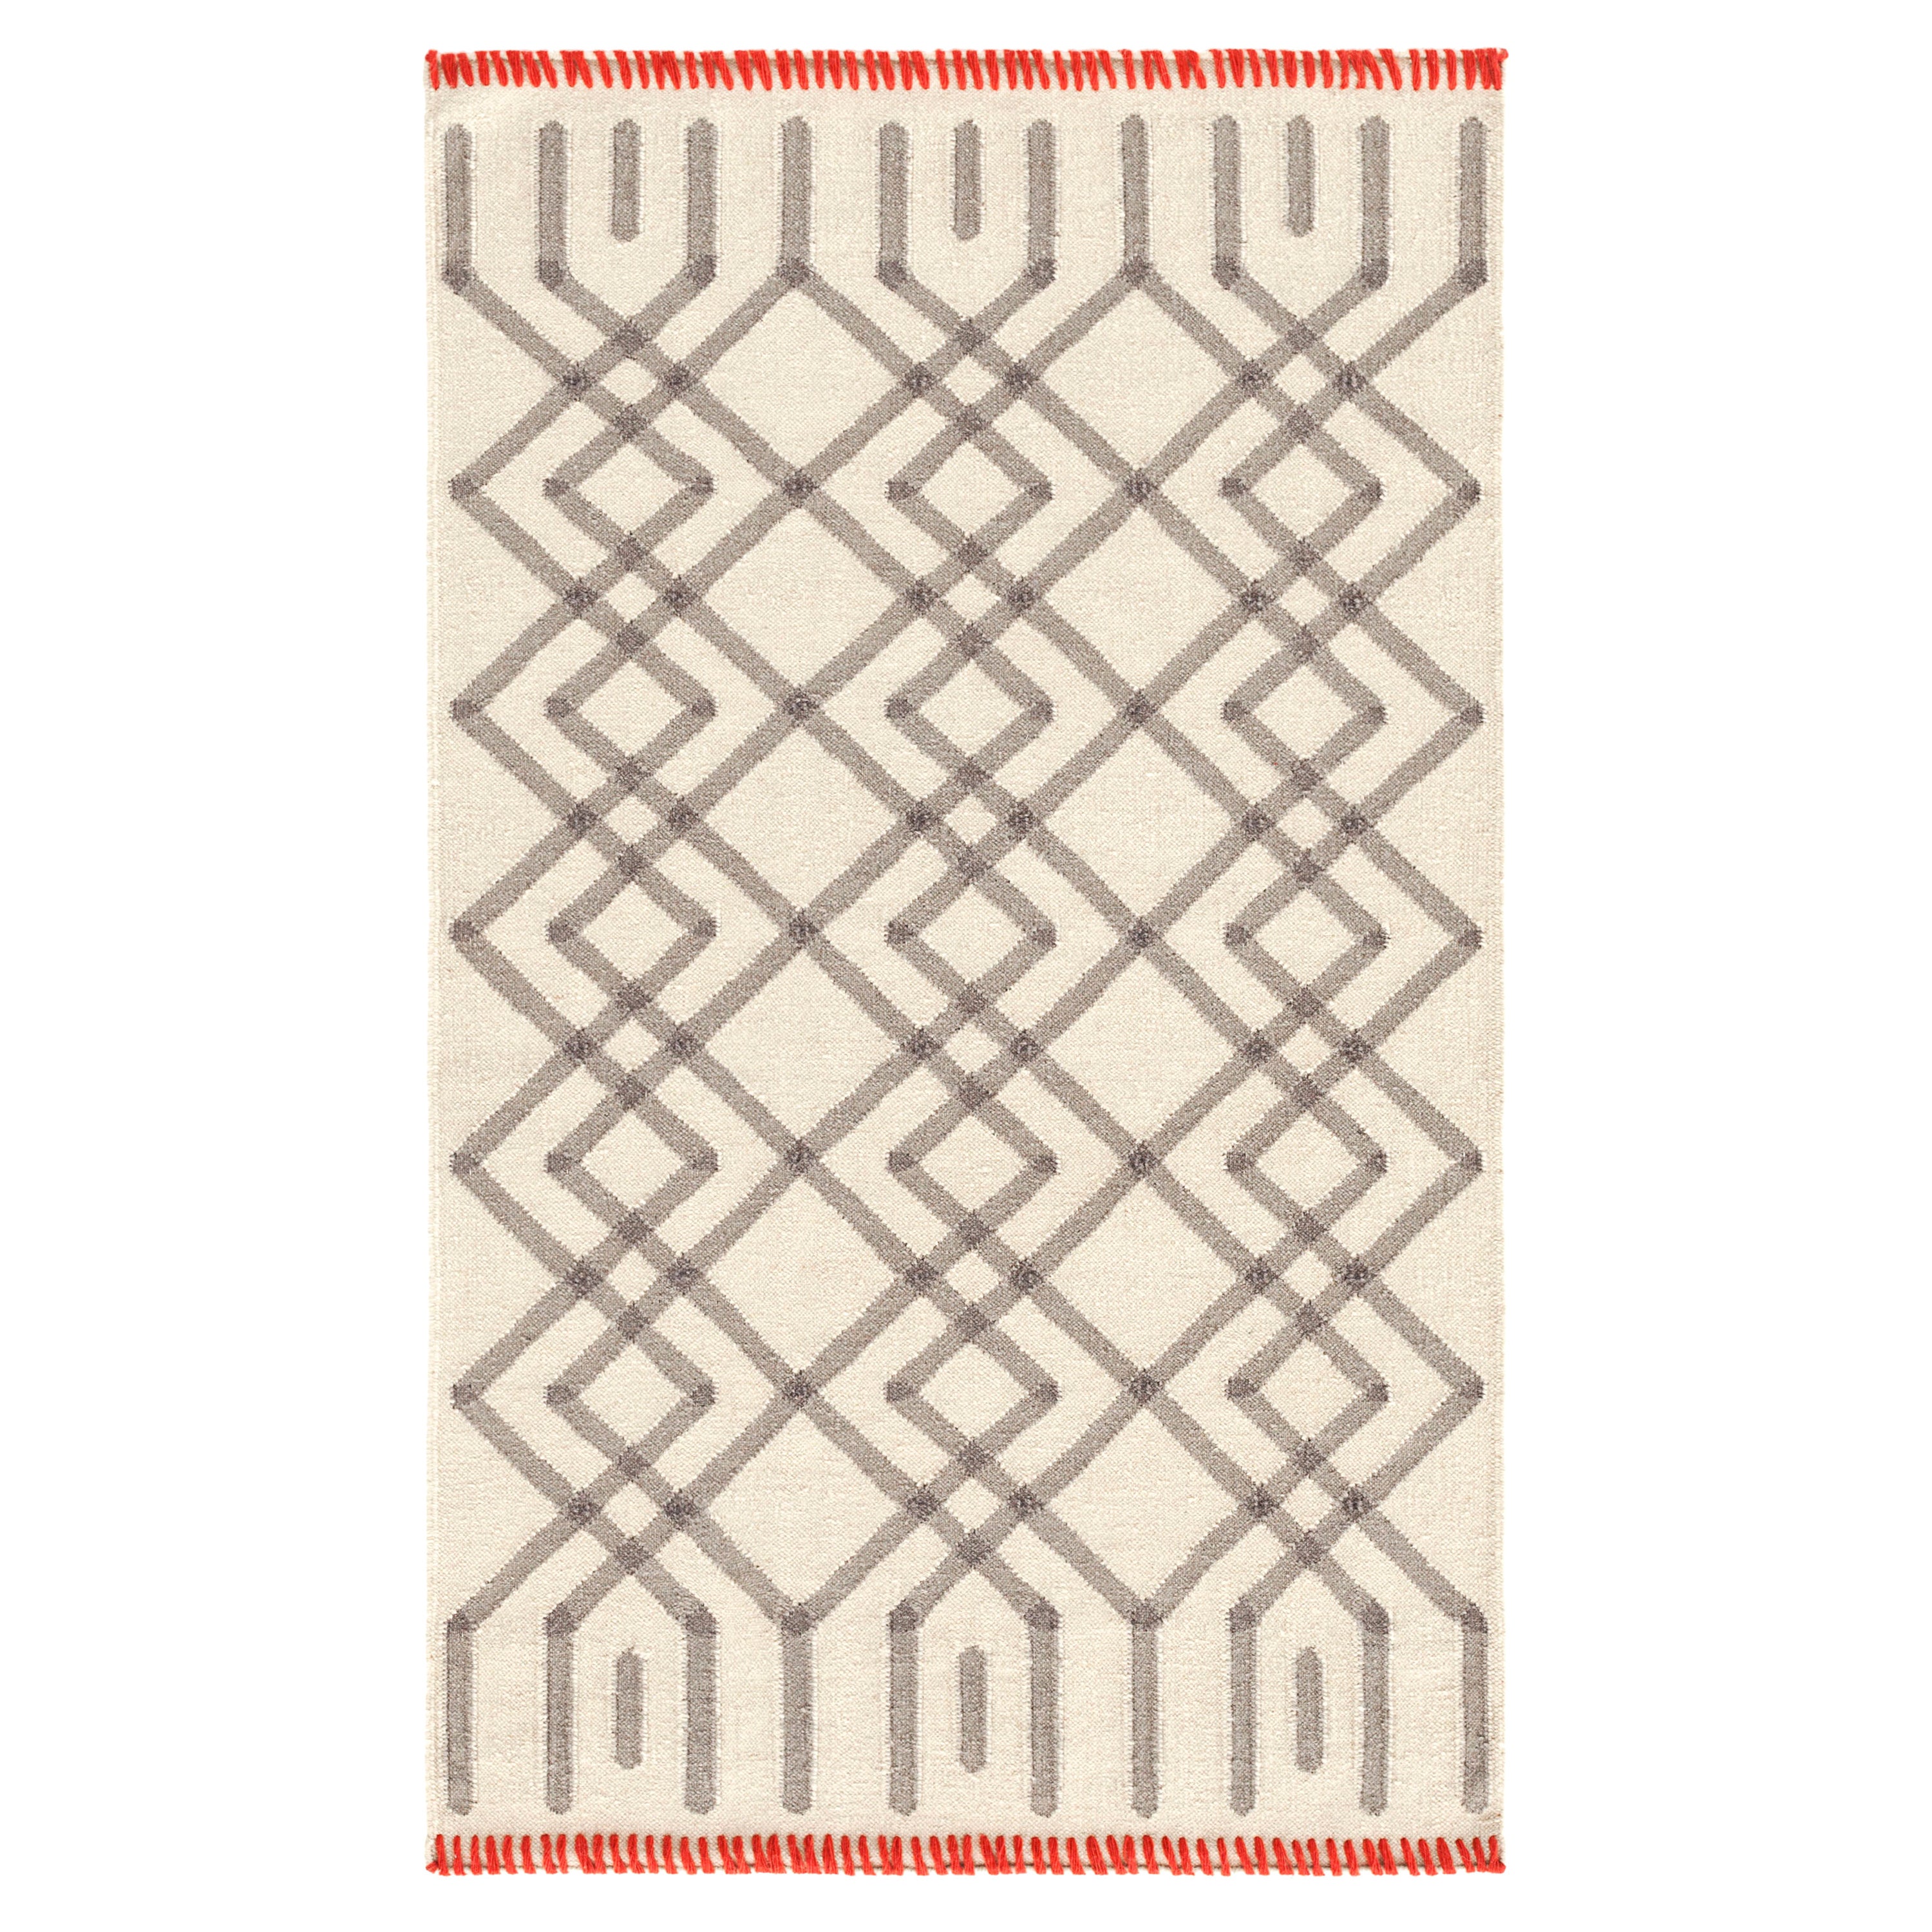 Kilim Technique Duna Small Rug in Grey by Odosdesign For Sale